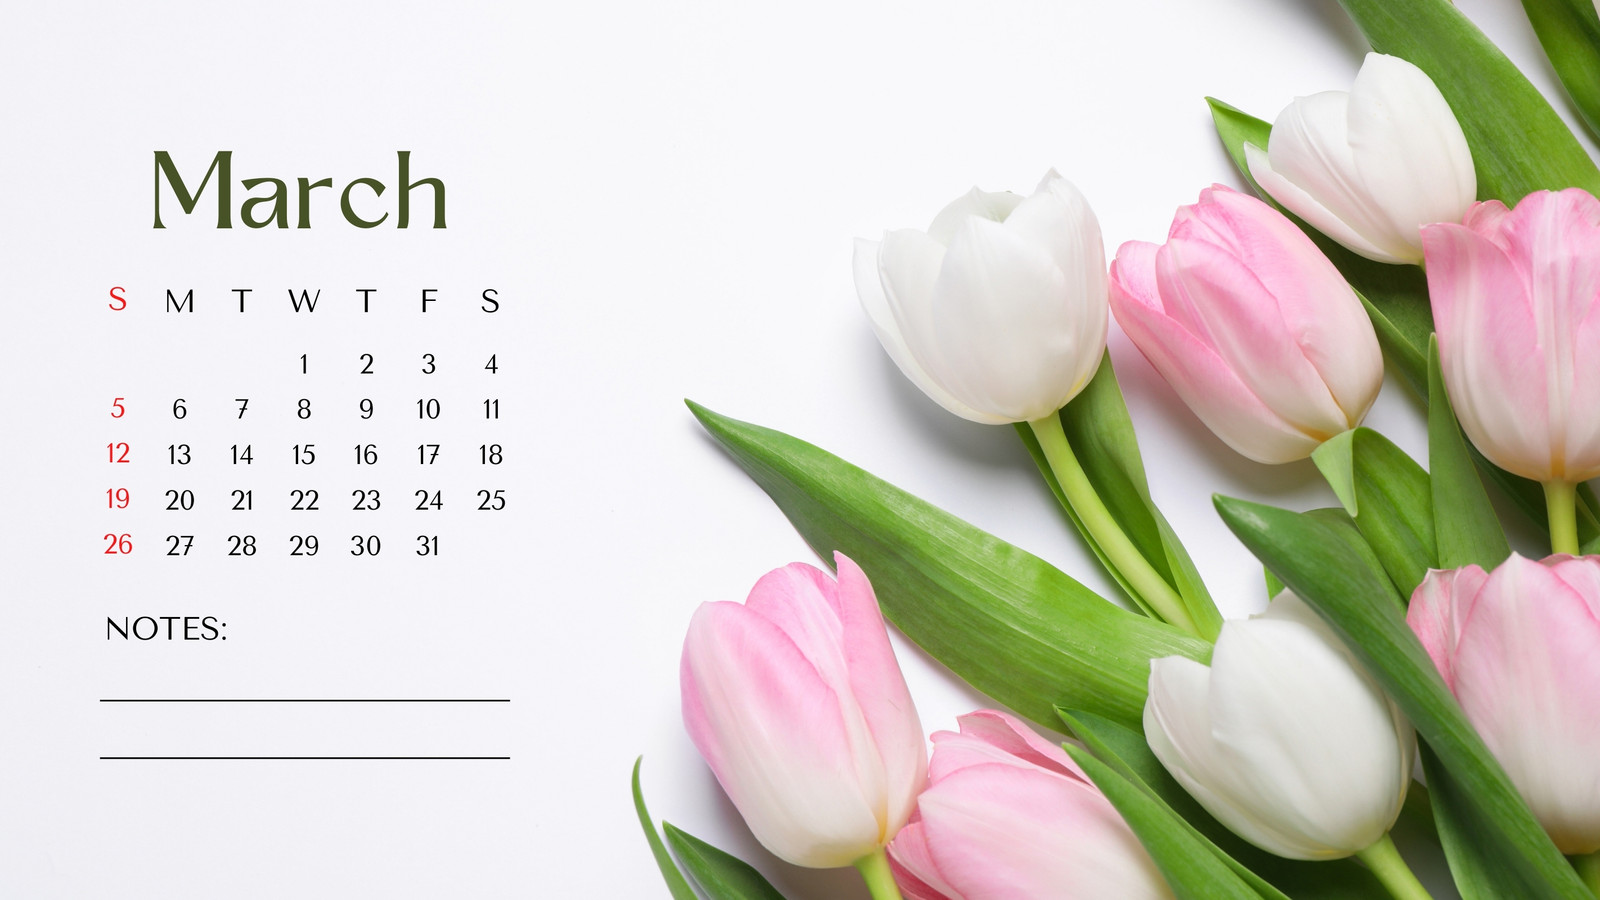 Free Downloadable Tech Backgrounds for March 2019  Tech background Desktop  wallpapers backgrounds Desktop wallpaper